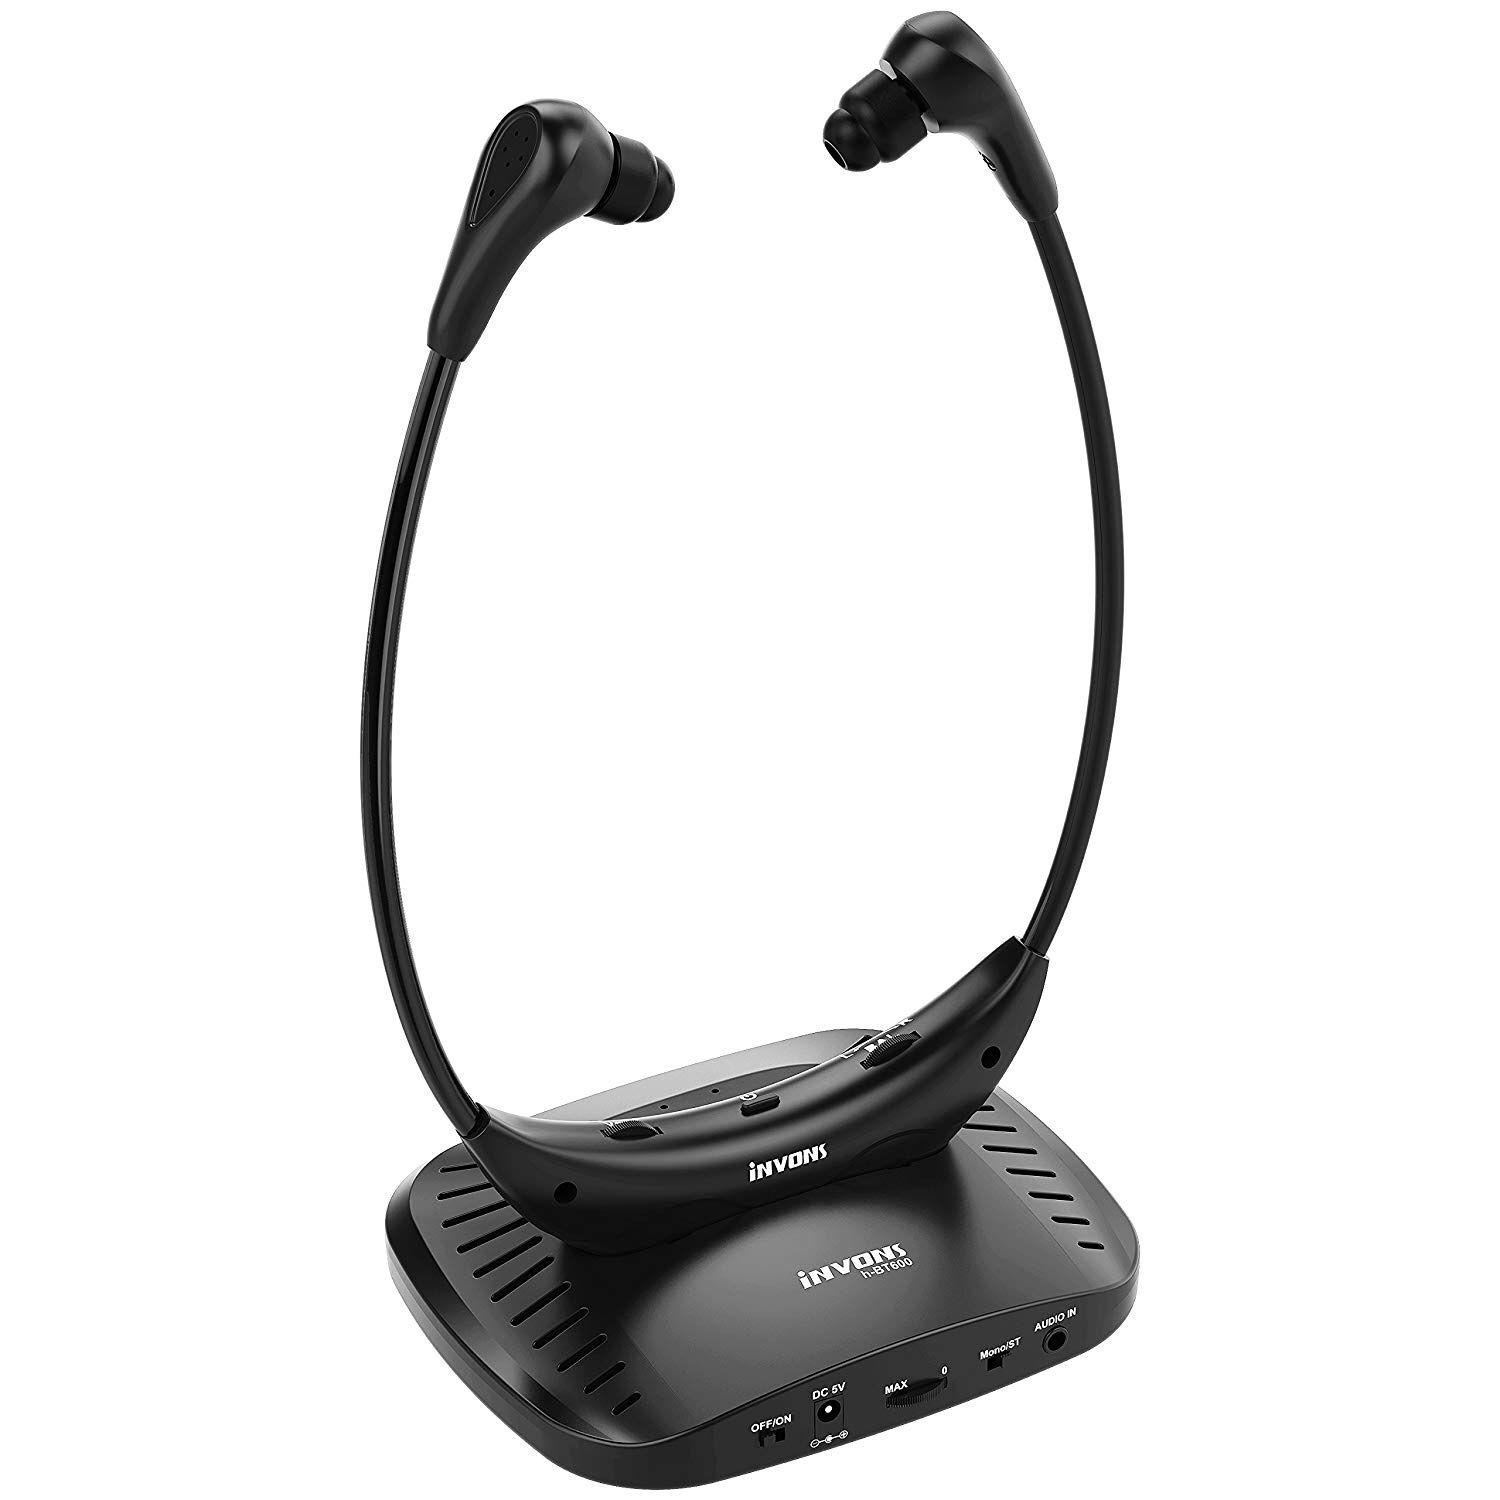 New Wireless TV Headphones-INVONS Bluetooth&Non-Bluetooth TV in Ear Stereo Hearing Aid Assistance Earbuds Dual Digital Listening Ears Headset System